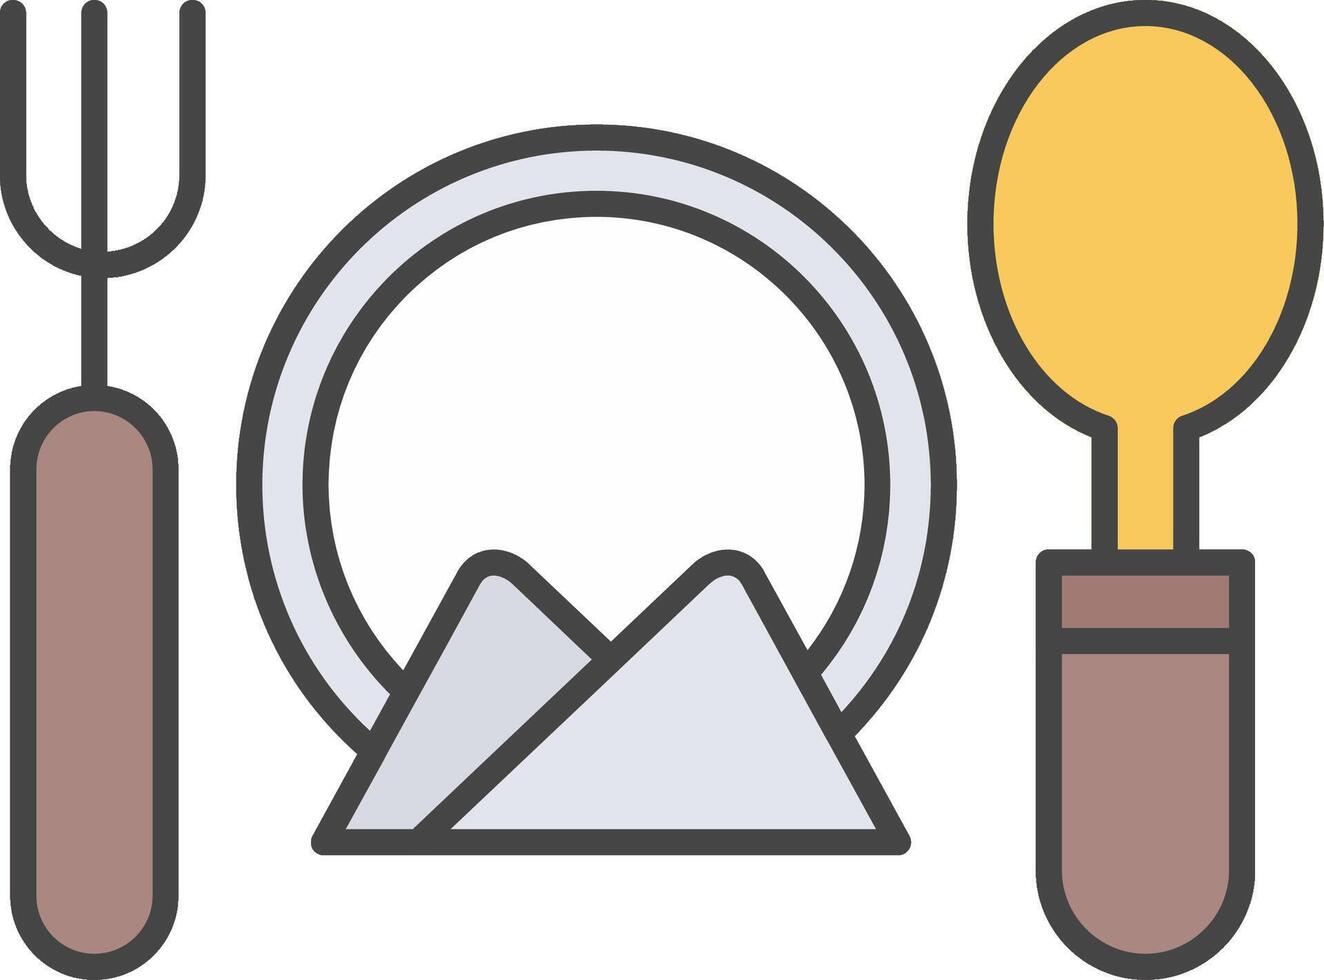 Cutlery Line Filled Light Icon vector